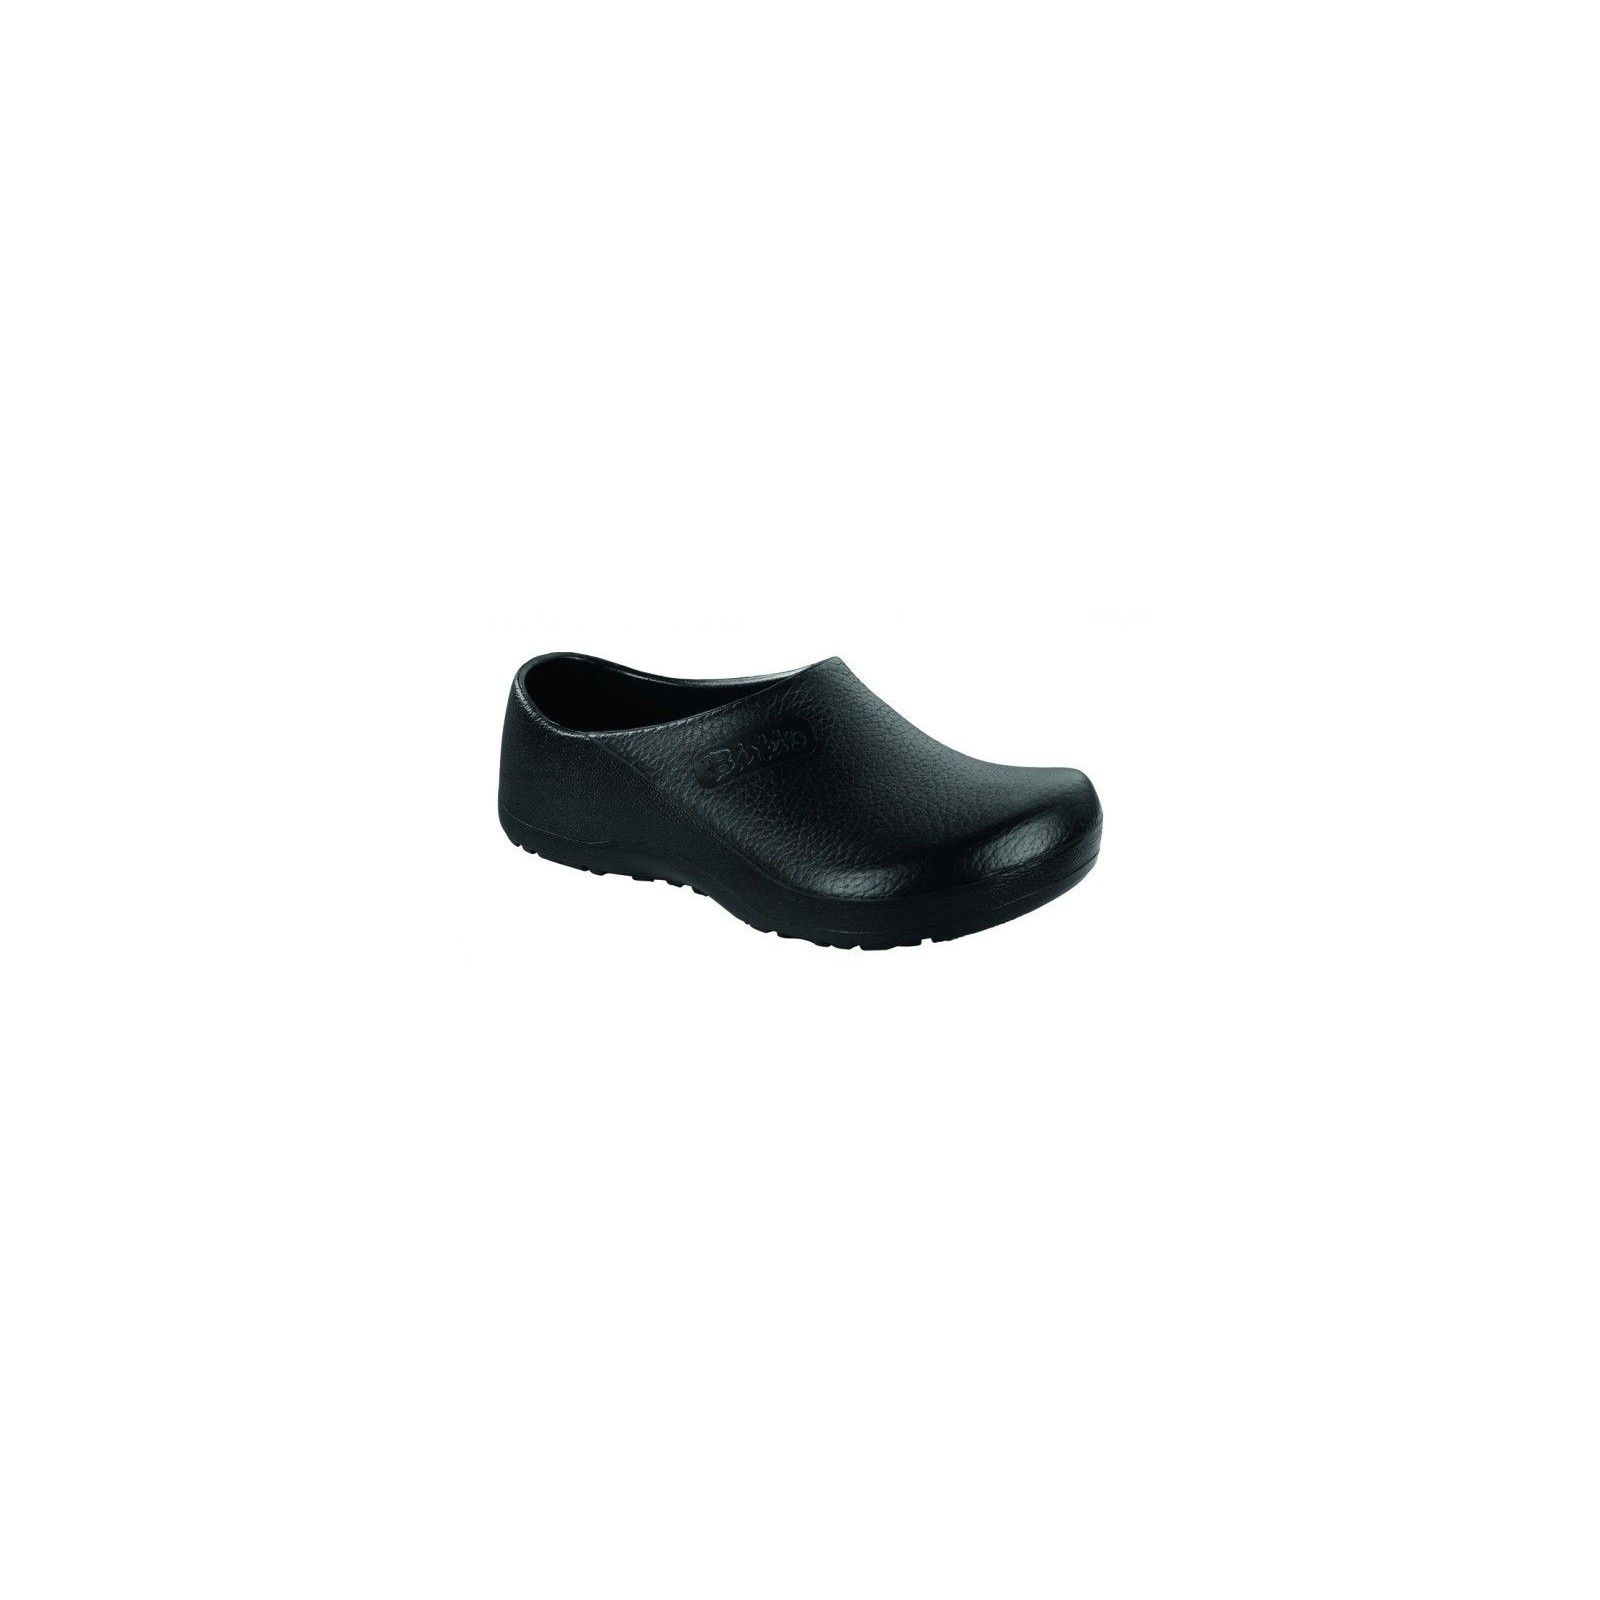 birkenstock chef shoes afterpay